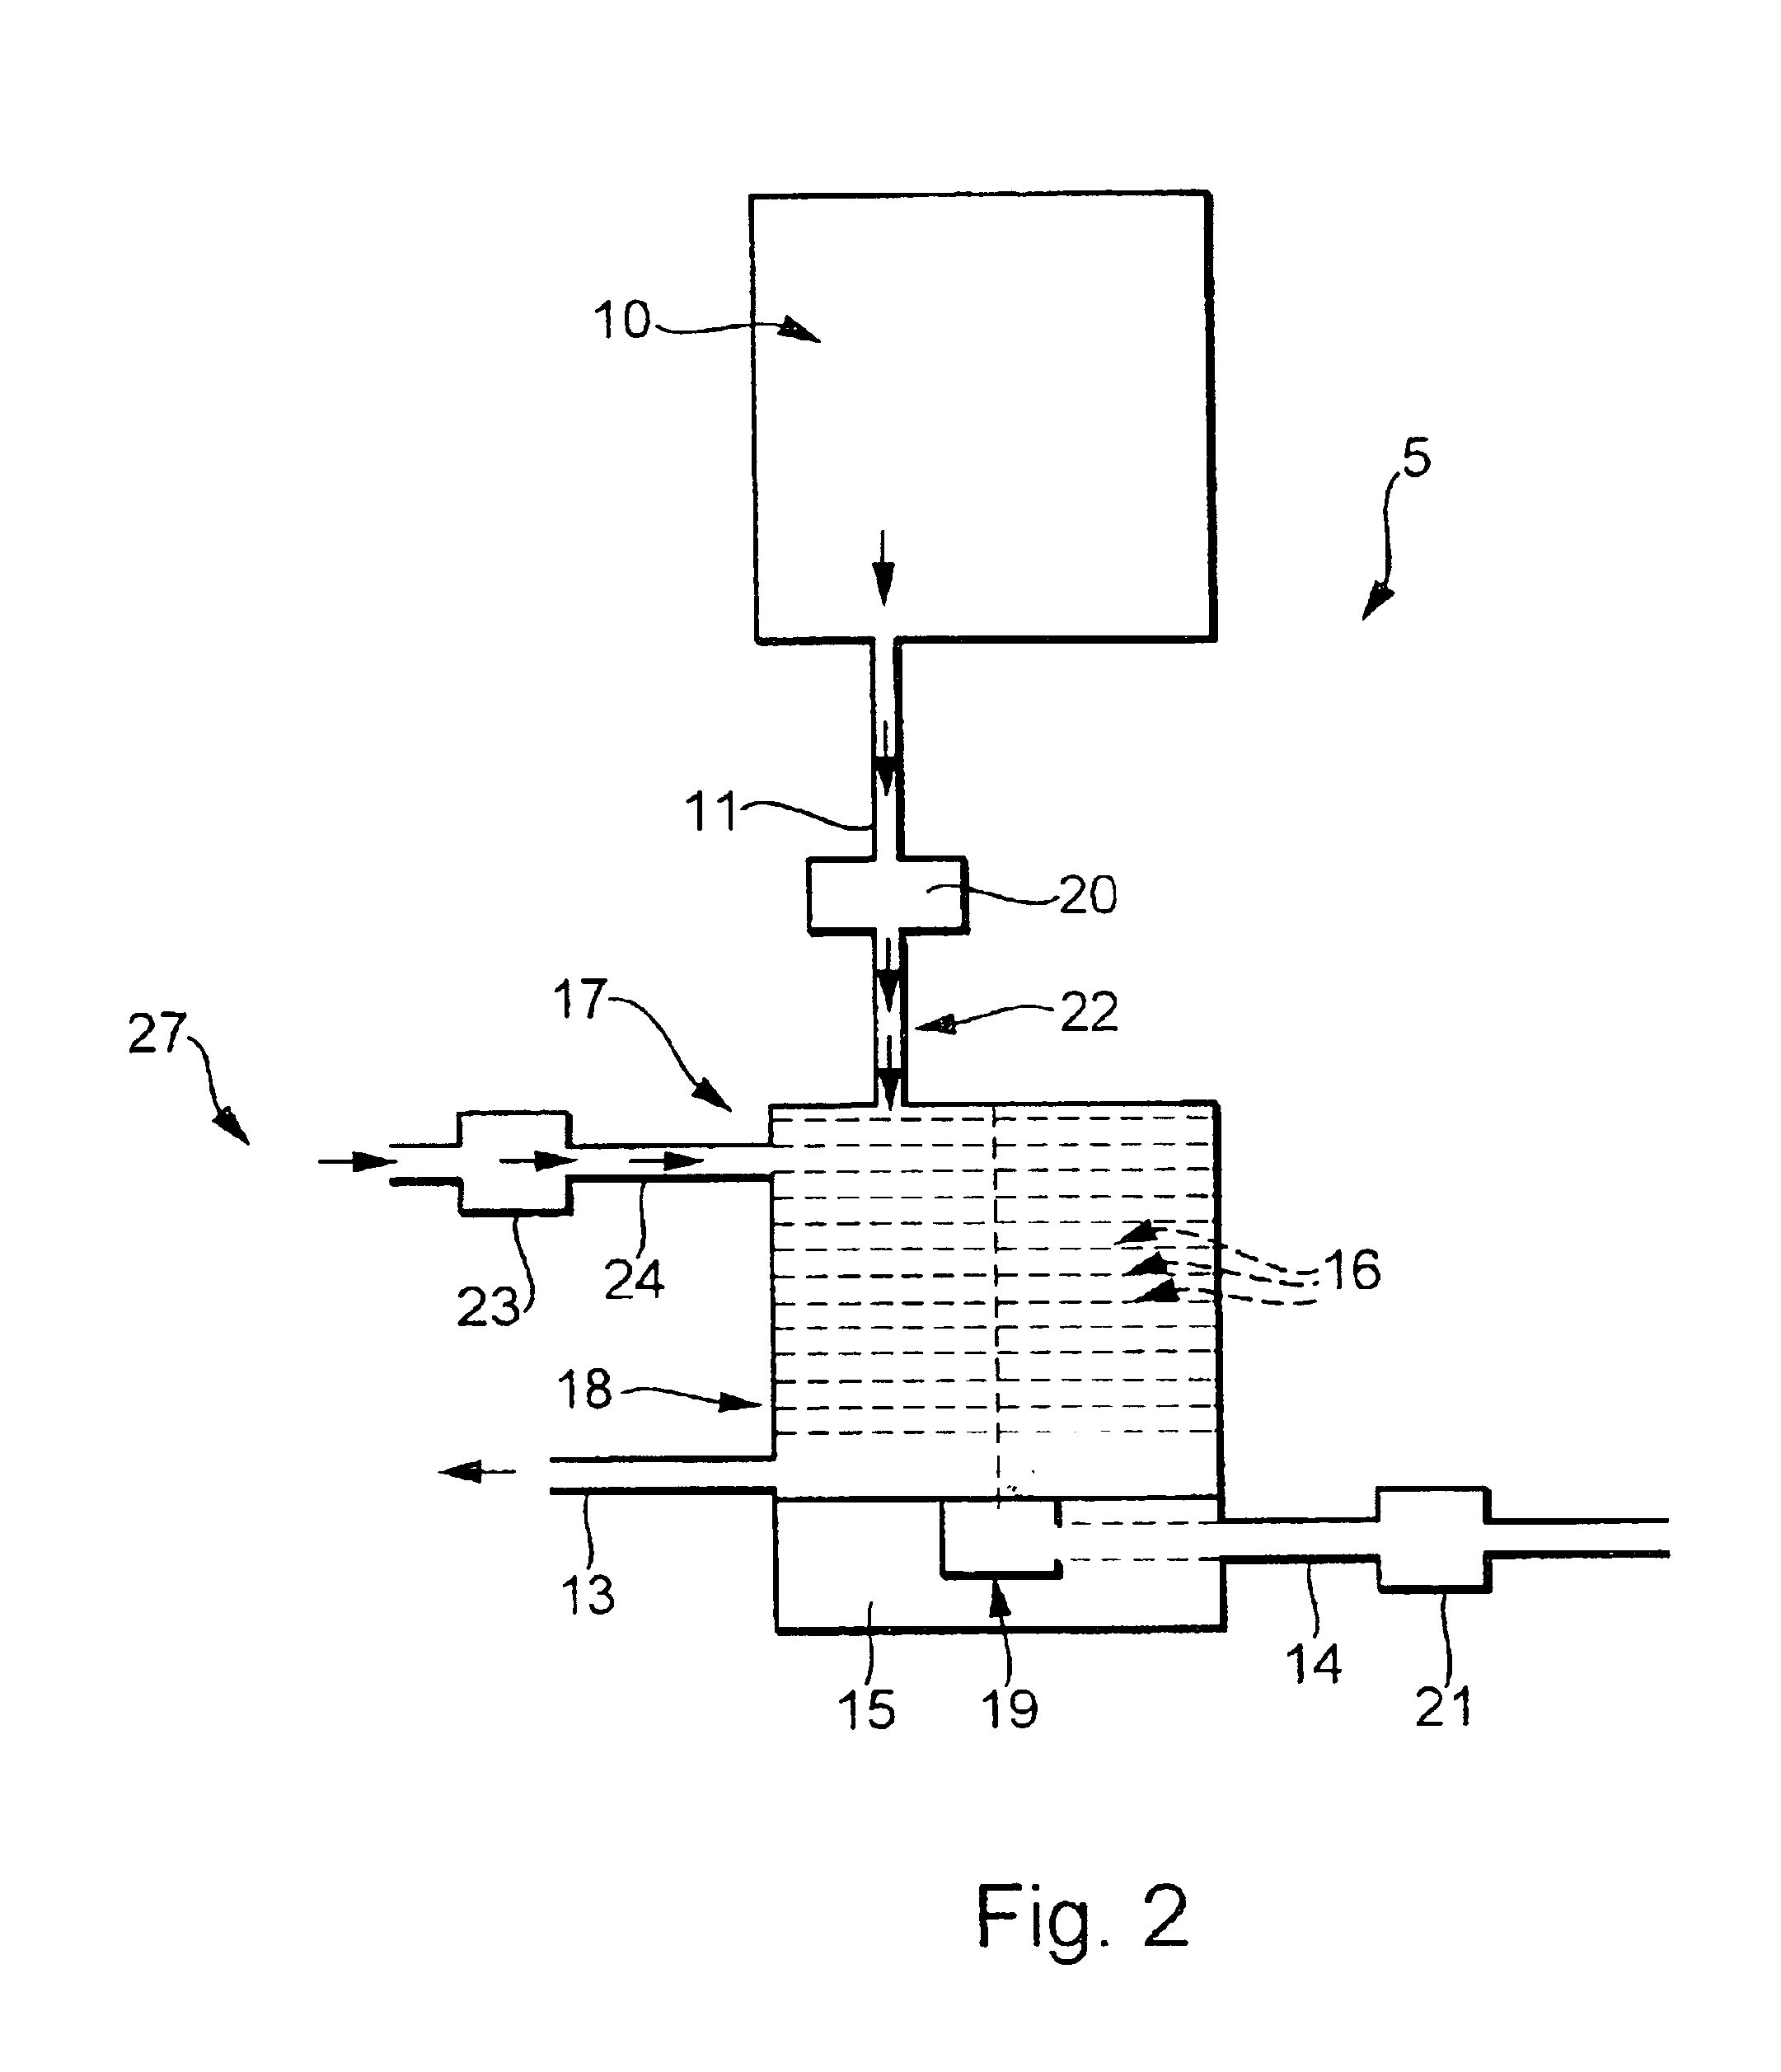 Method of avoiding or eliminating deposits in the exhaust area of a vacuum system